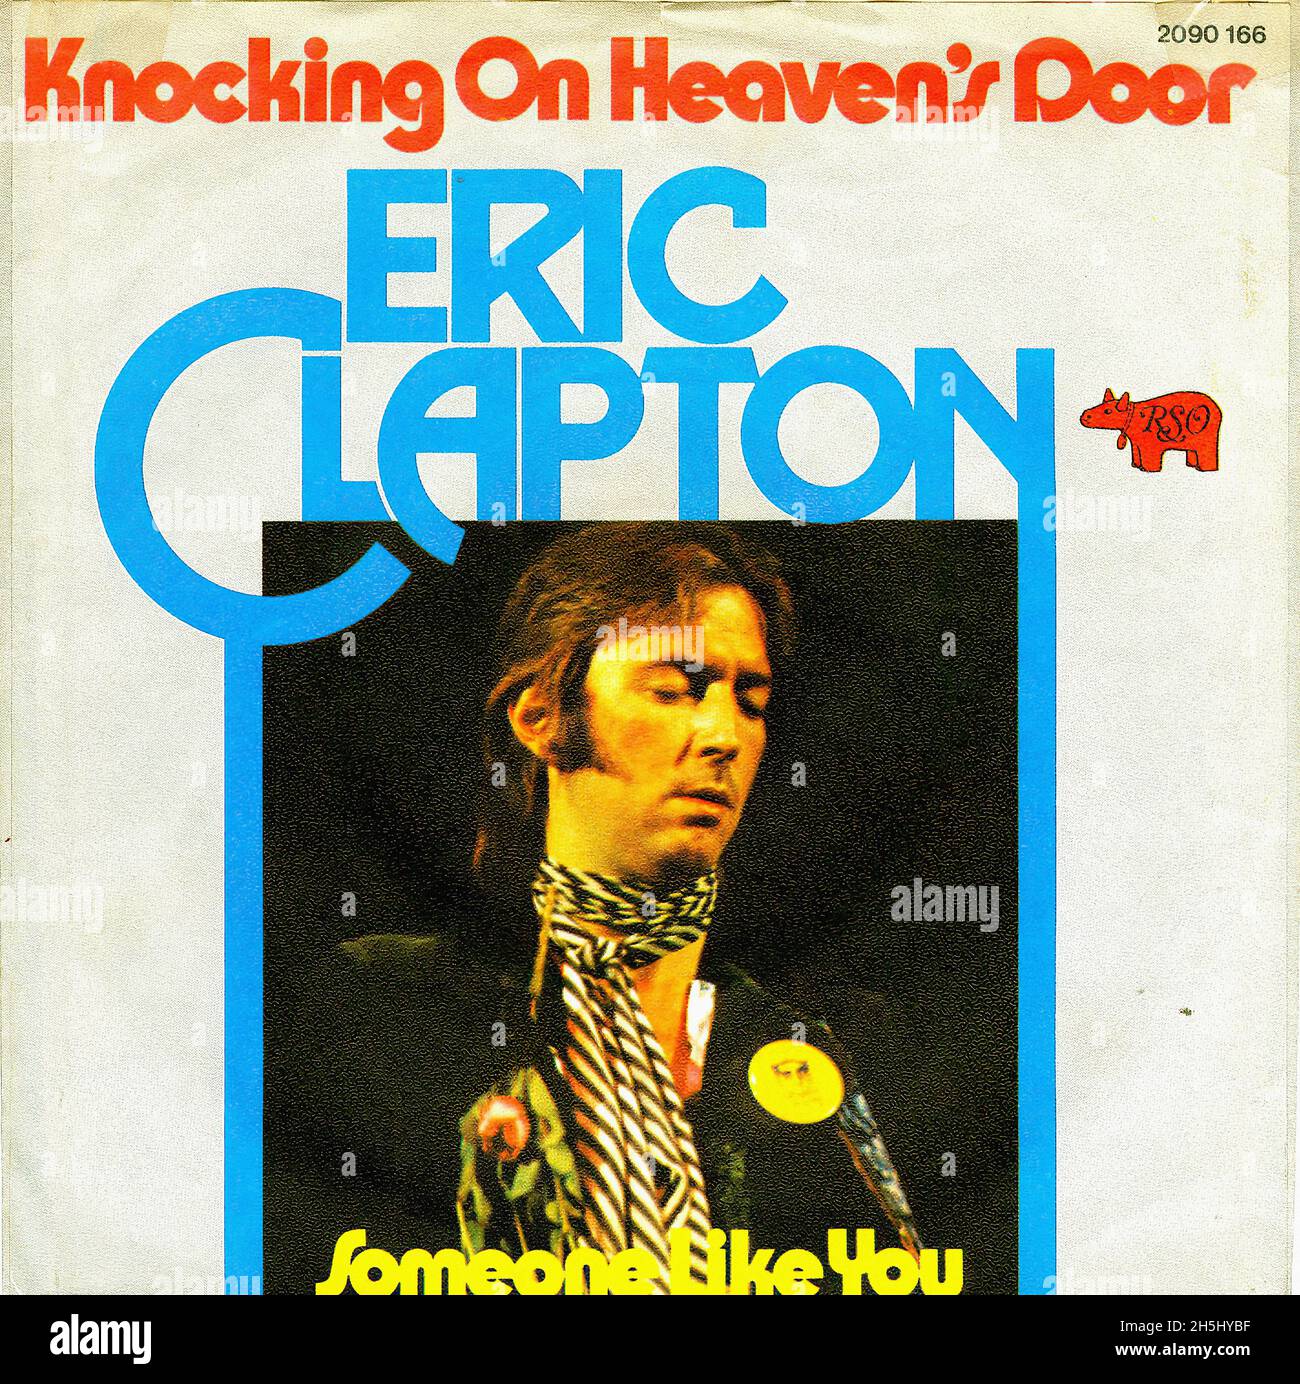 Vintage single record cover - Clapton, Eric - 4 - Knocking On Heaven's Door - D - 1975 Stock Photo